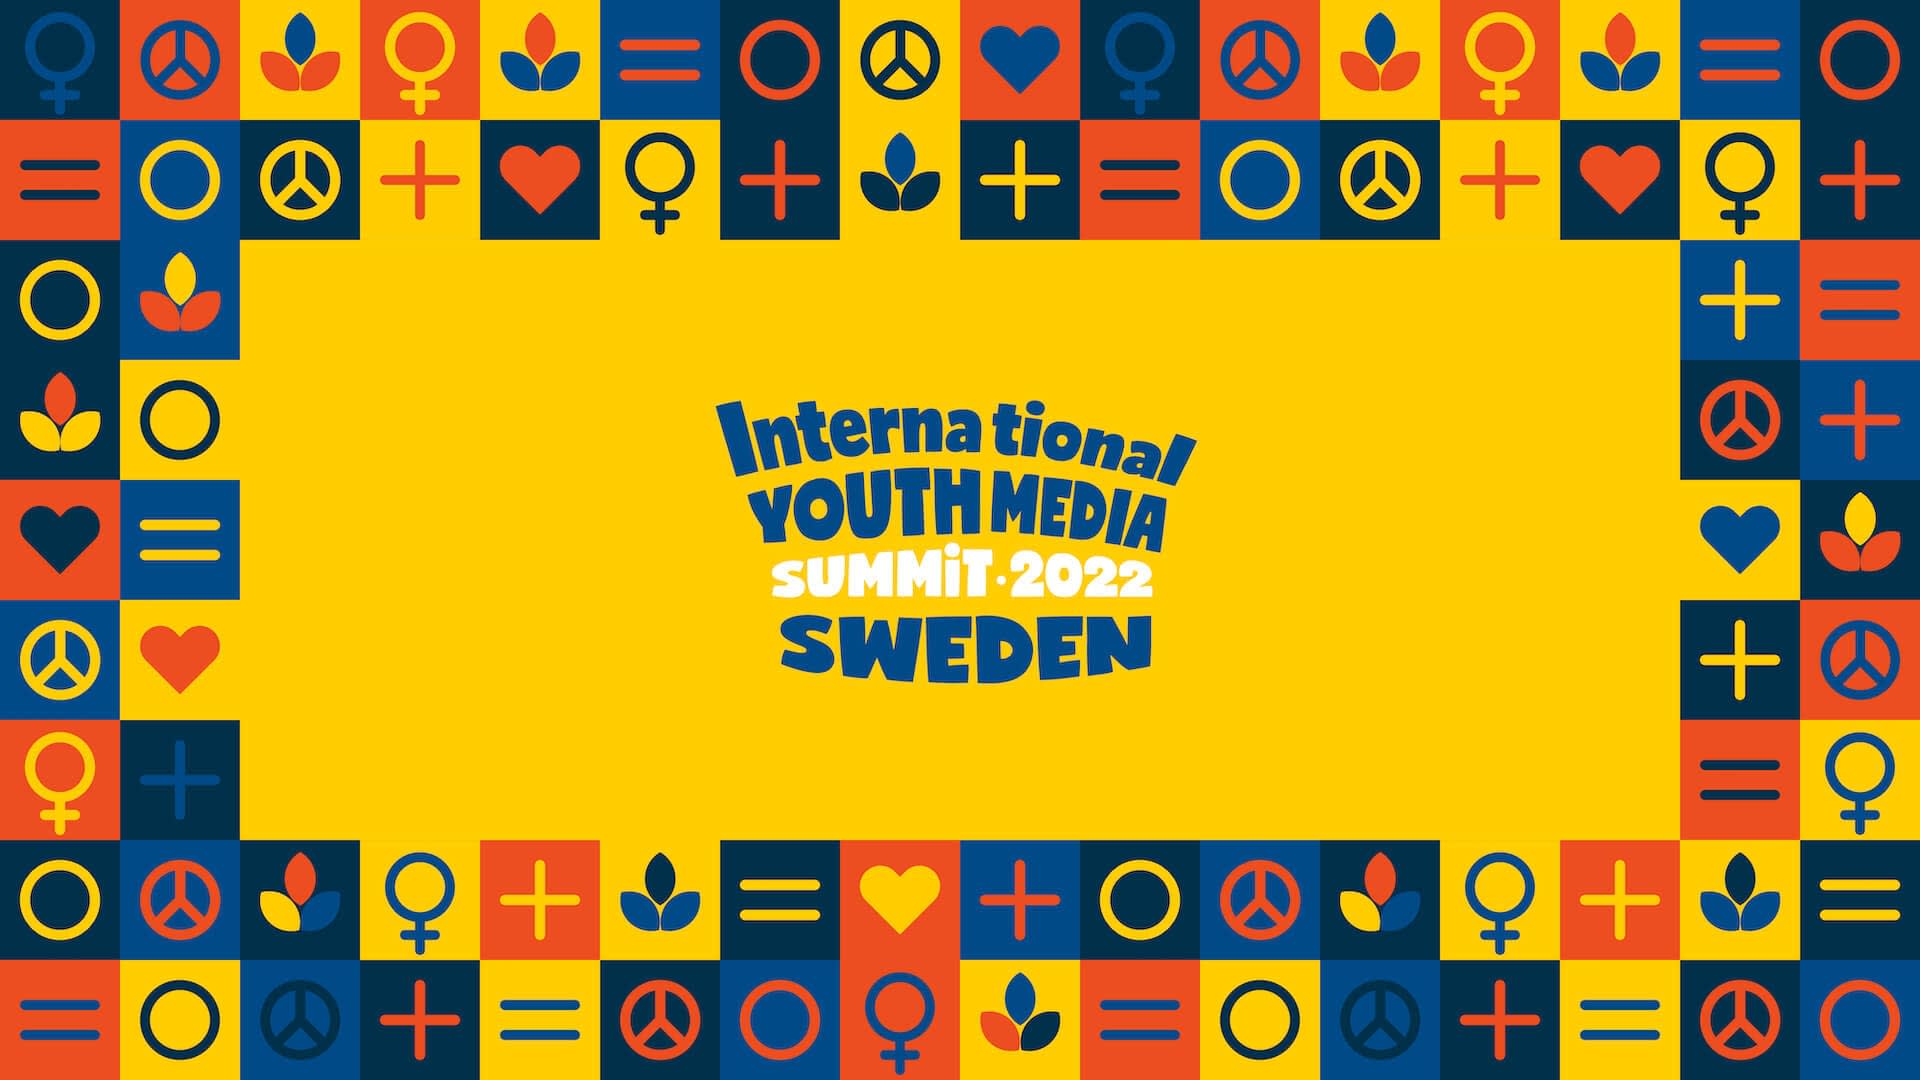 IYMS presents 4th International Youth Media Day, announcing first in-person event since the pandemic